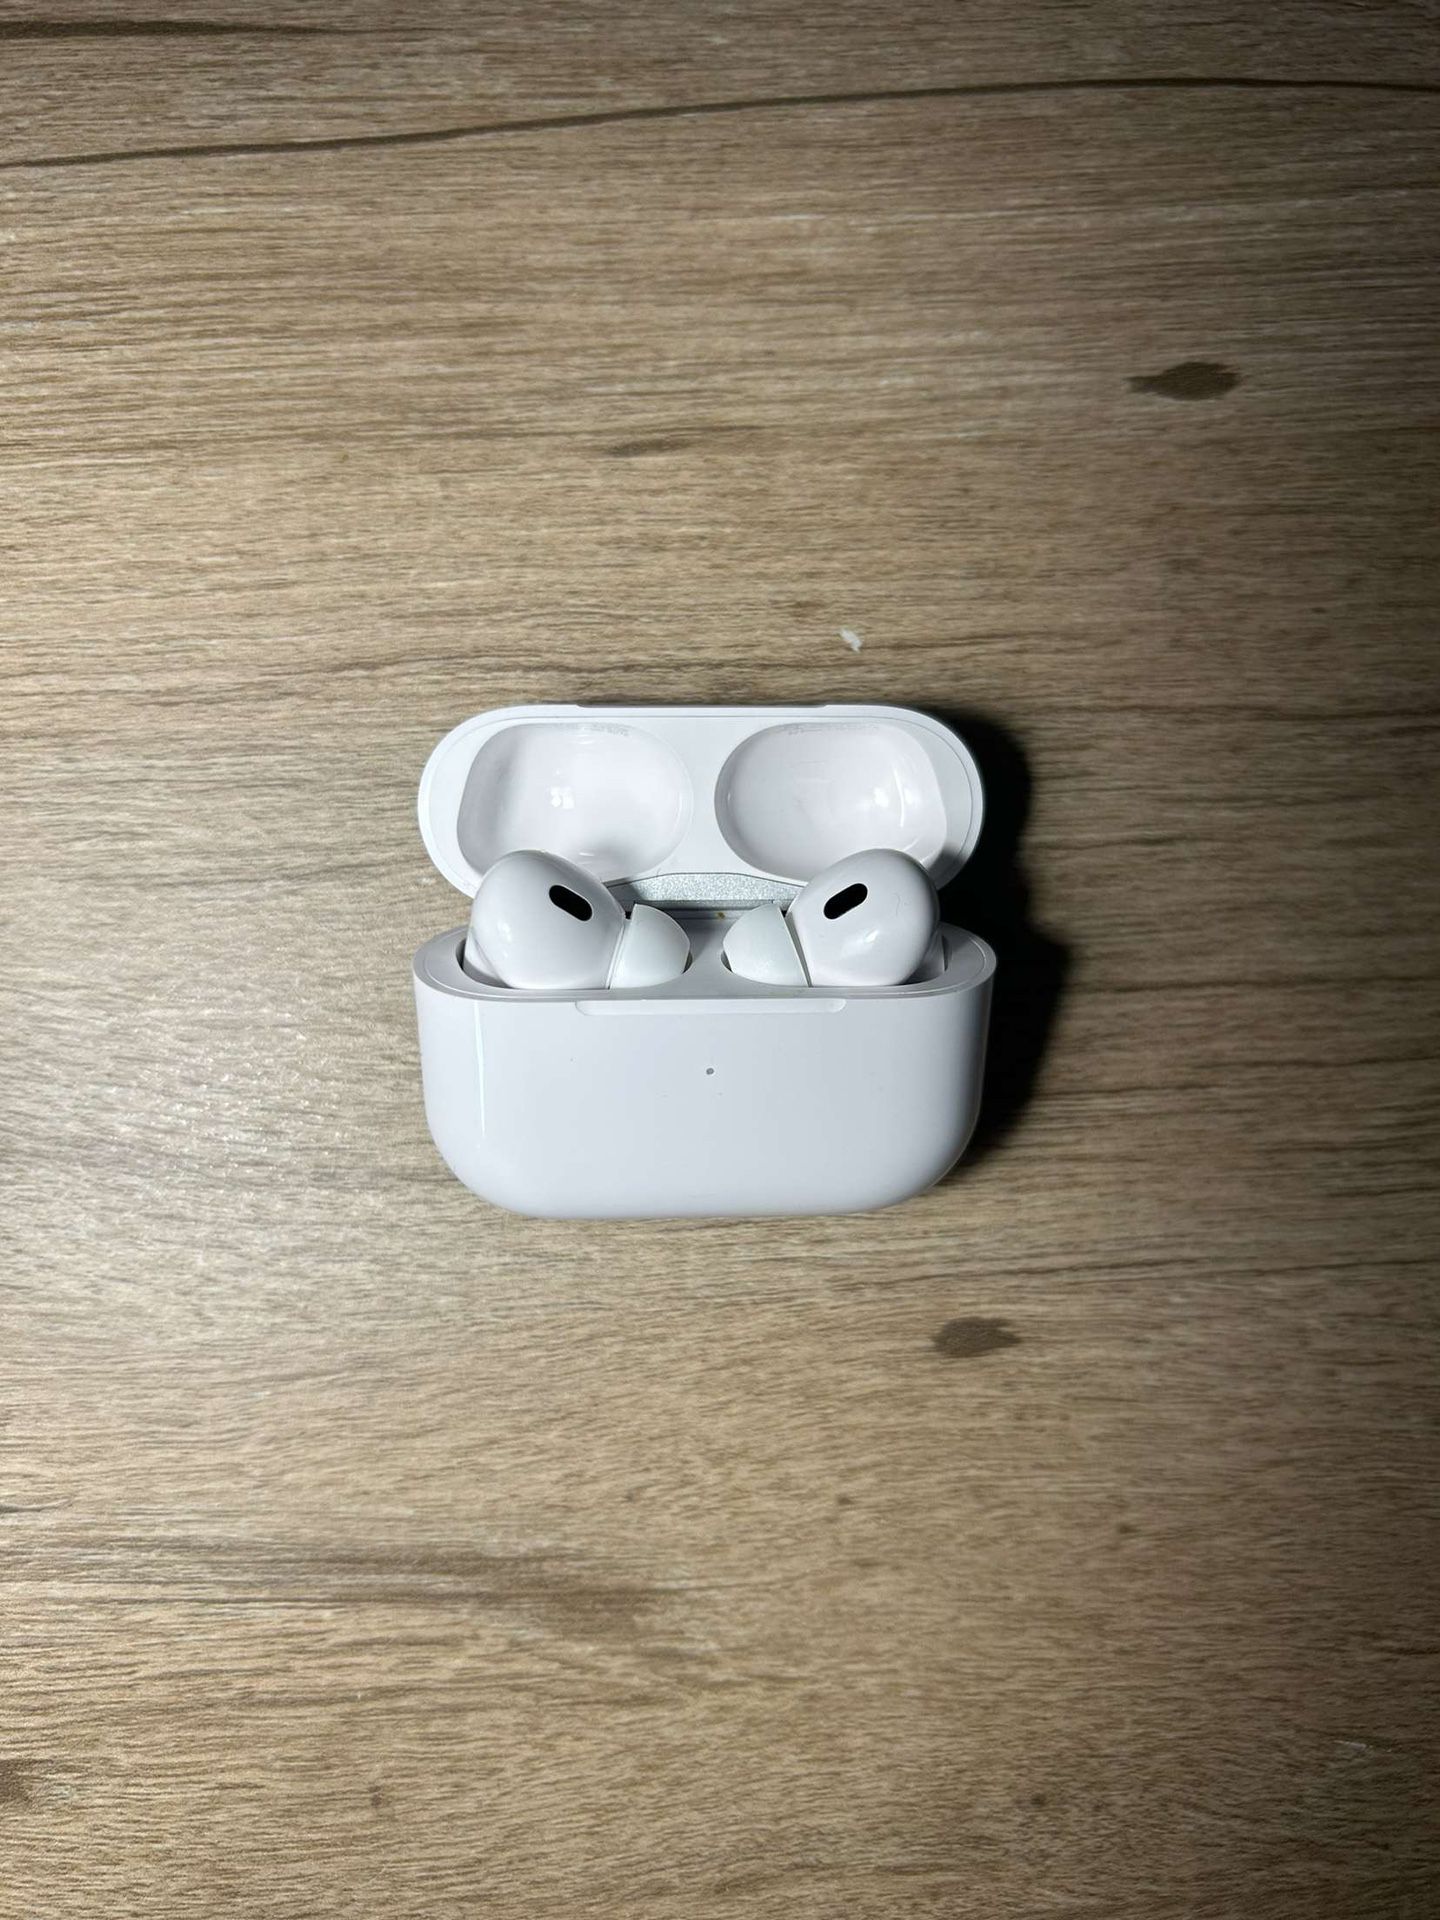 *BEST OFFER* AirPods With MagSafe Charging Case- White 